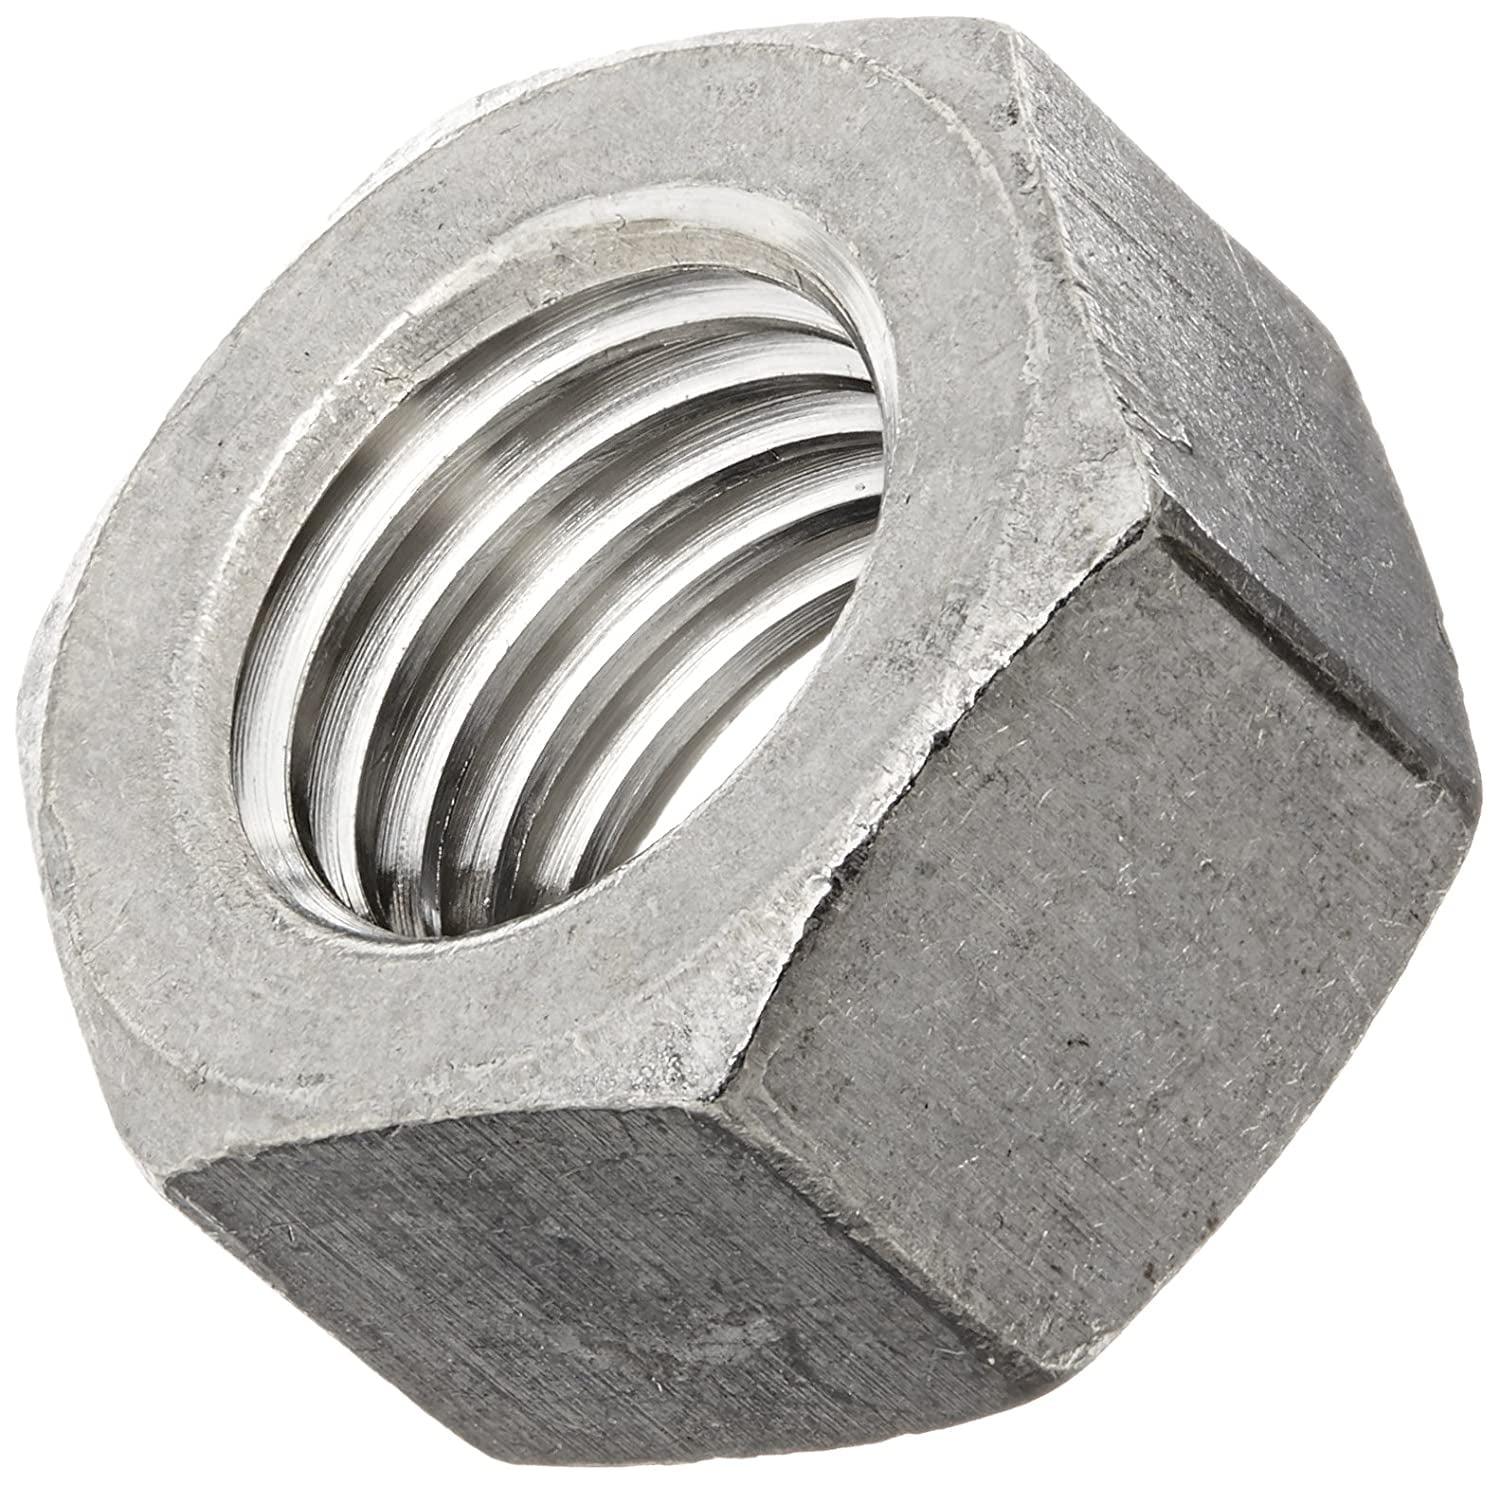 Steel Hex Jam Nut Zinc Plated Finish ASME B18.2.2 1/4 Thick 11/16 Width Across Flats Grade 2 Pack of 100 7/16-20 Thread Size